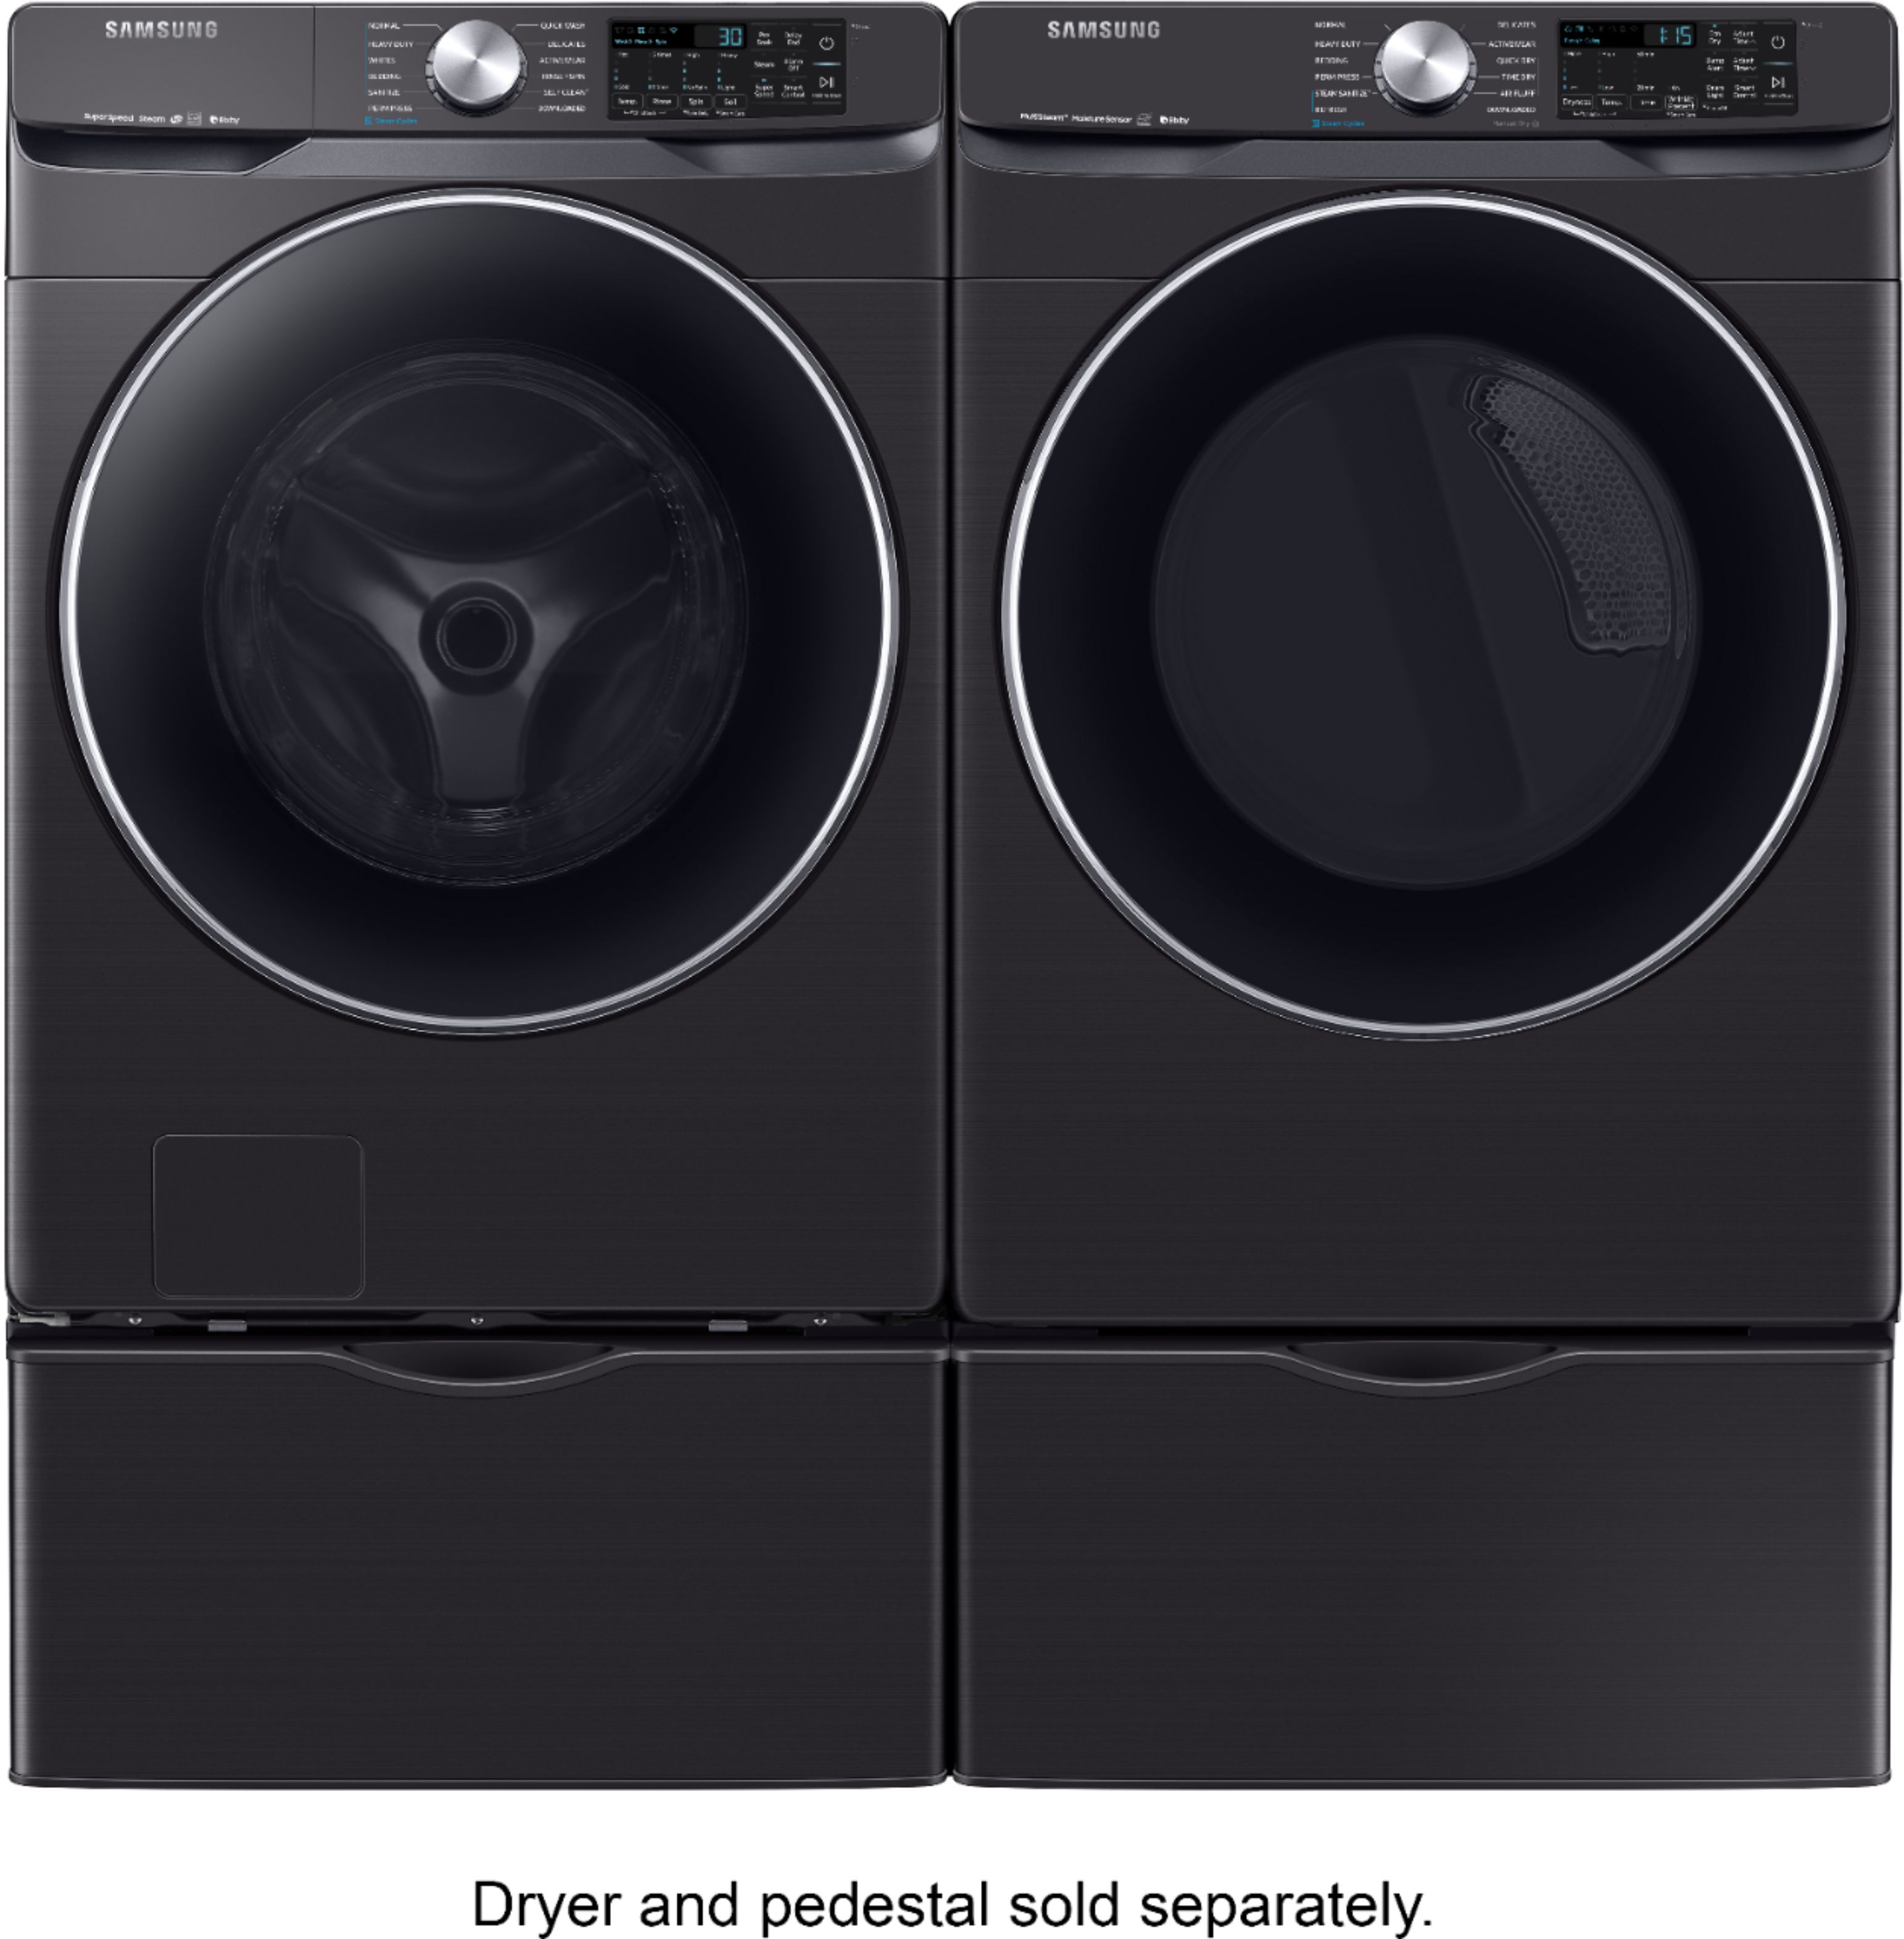 How long is the warranty on a samsung washing machine Samsung 4 5 Cu Ft High Efficiency Stackable Smart Front Load Washer With Steam And Super Speed Black Stainless Steel Wf45r6300av Us Best Buy